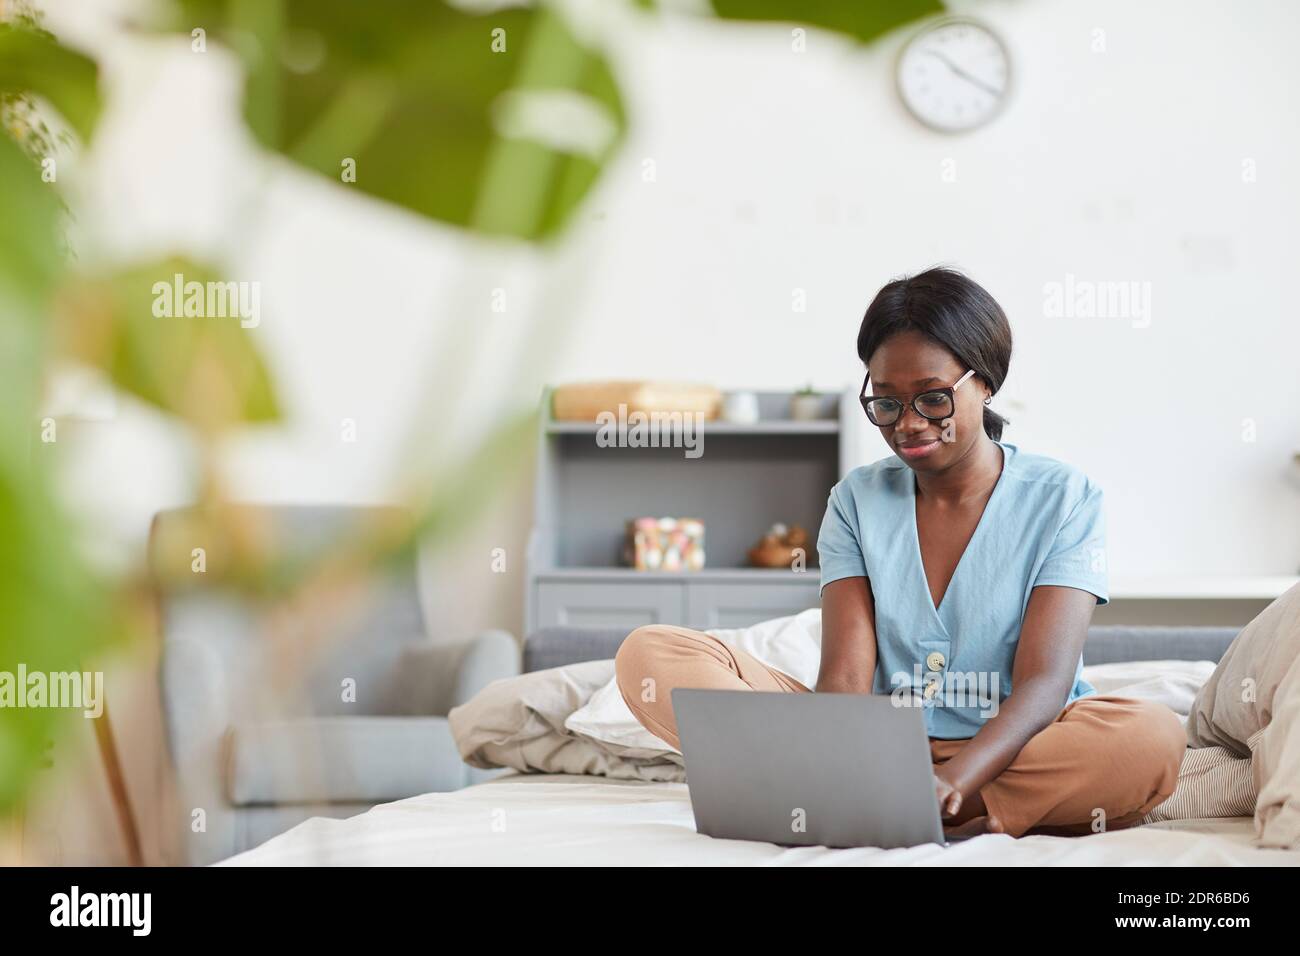 Full length portrait of young African-American woman using laptop while sitting on bed at home with plant leaves framing, copy space Stock Photo